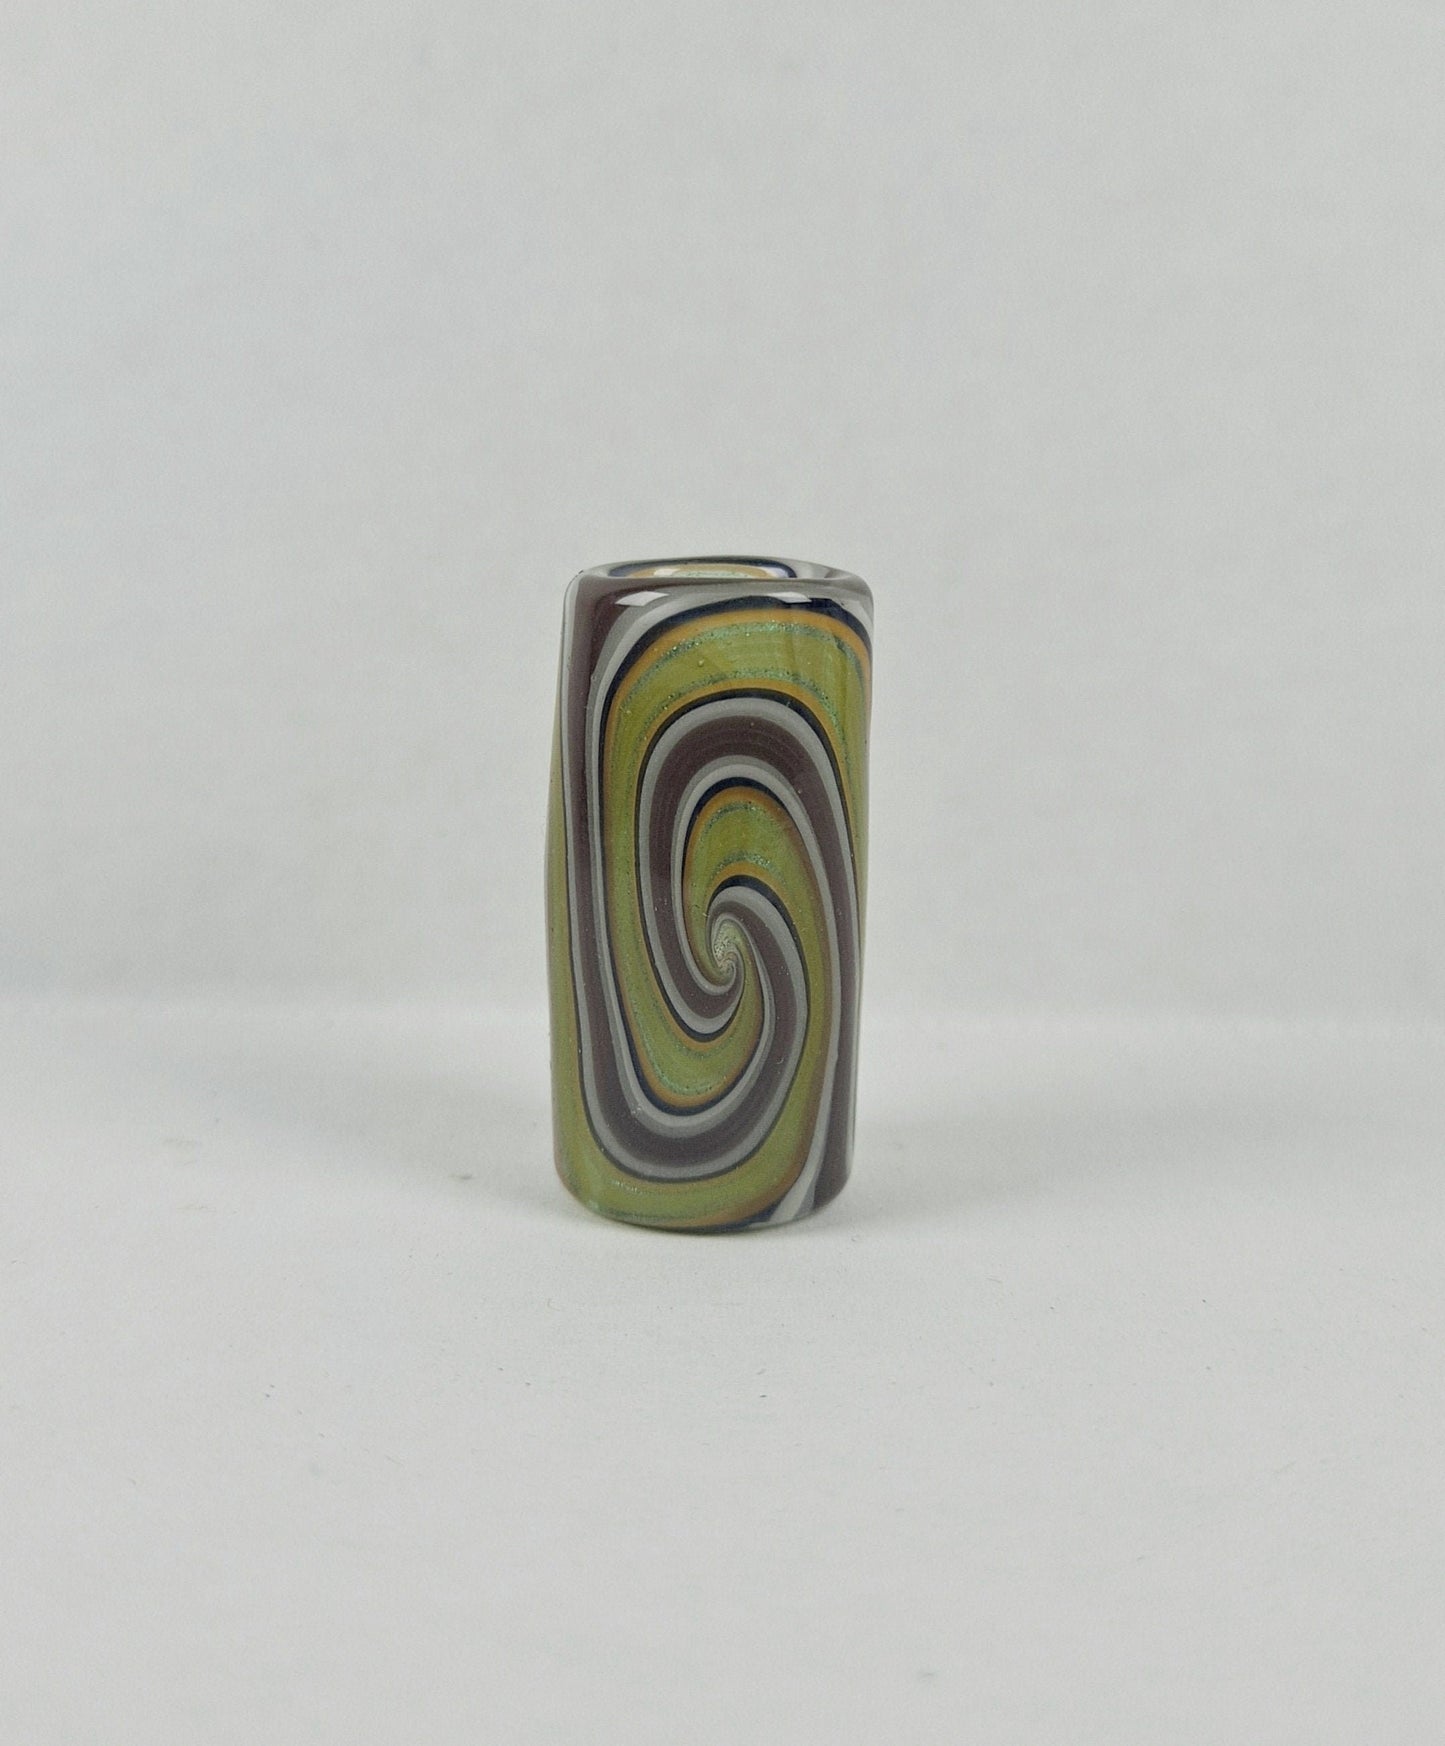 Forest Spirit Glass Dread Bead - 10MM Bead Hole, Ready to Ship